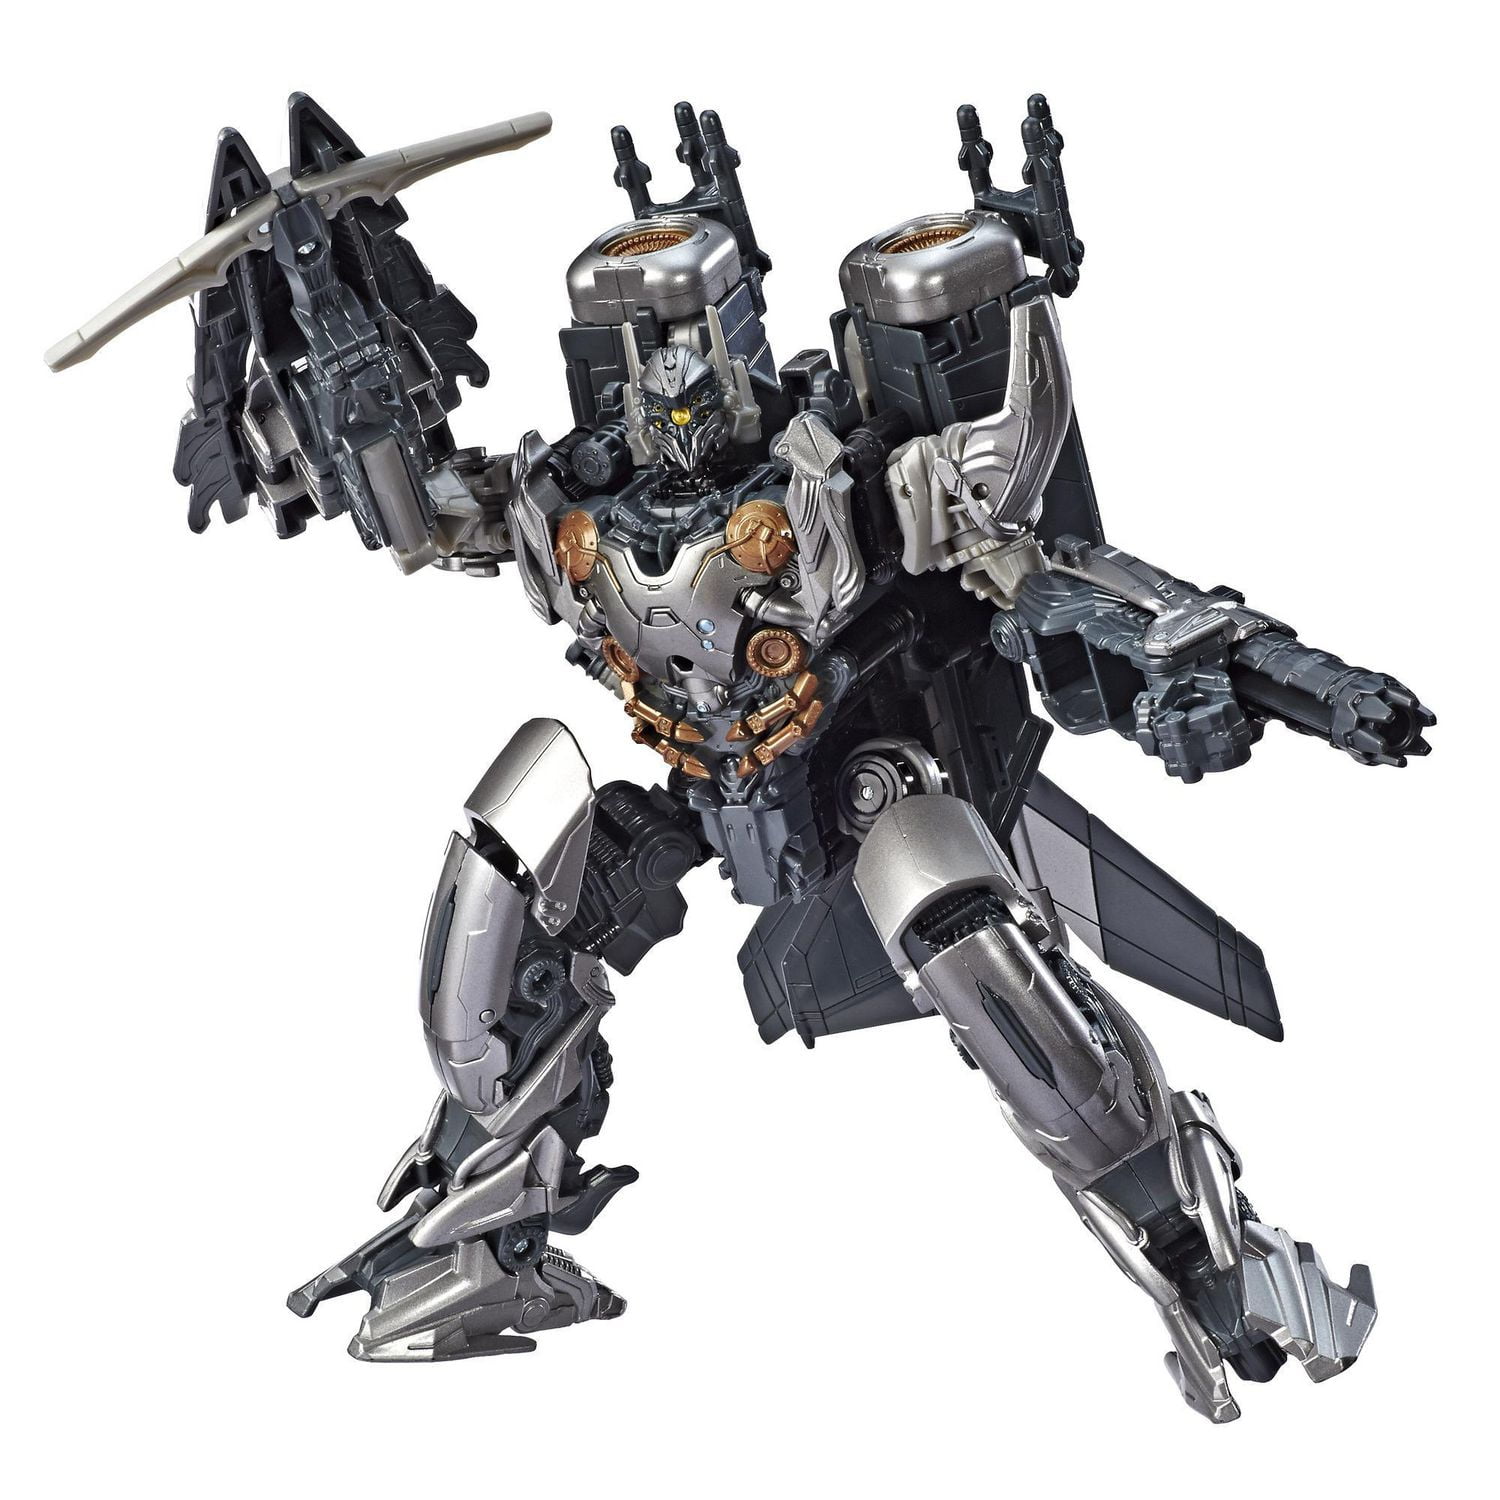 Transformers Studio Series 43 Voyager Class Transformers: Age of